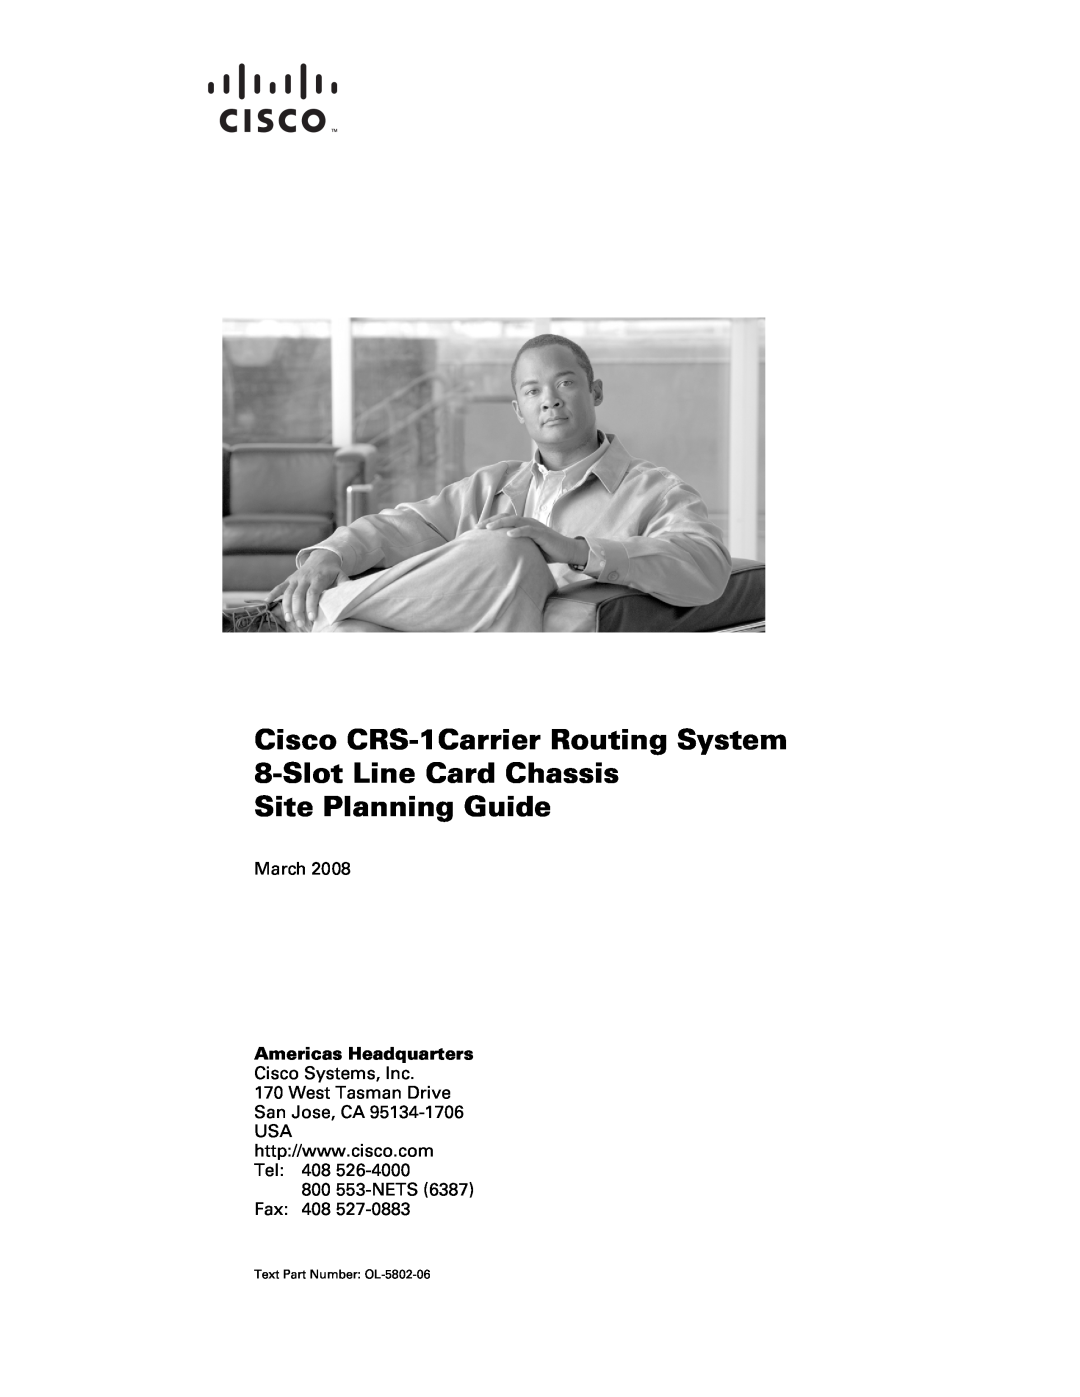 Cisco Systems specifications Cisco CRS-1Carrier Routing System, C H A P T E R 